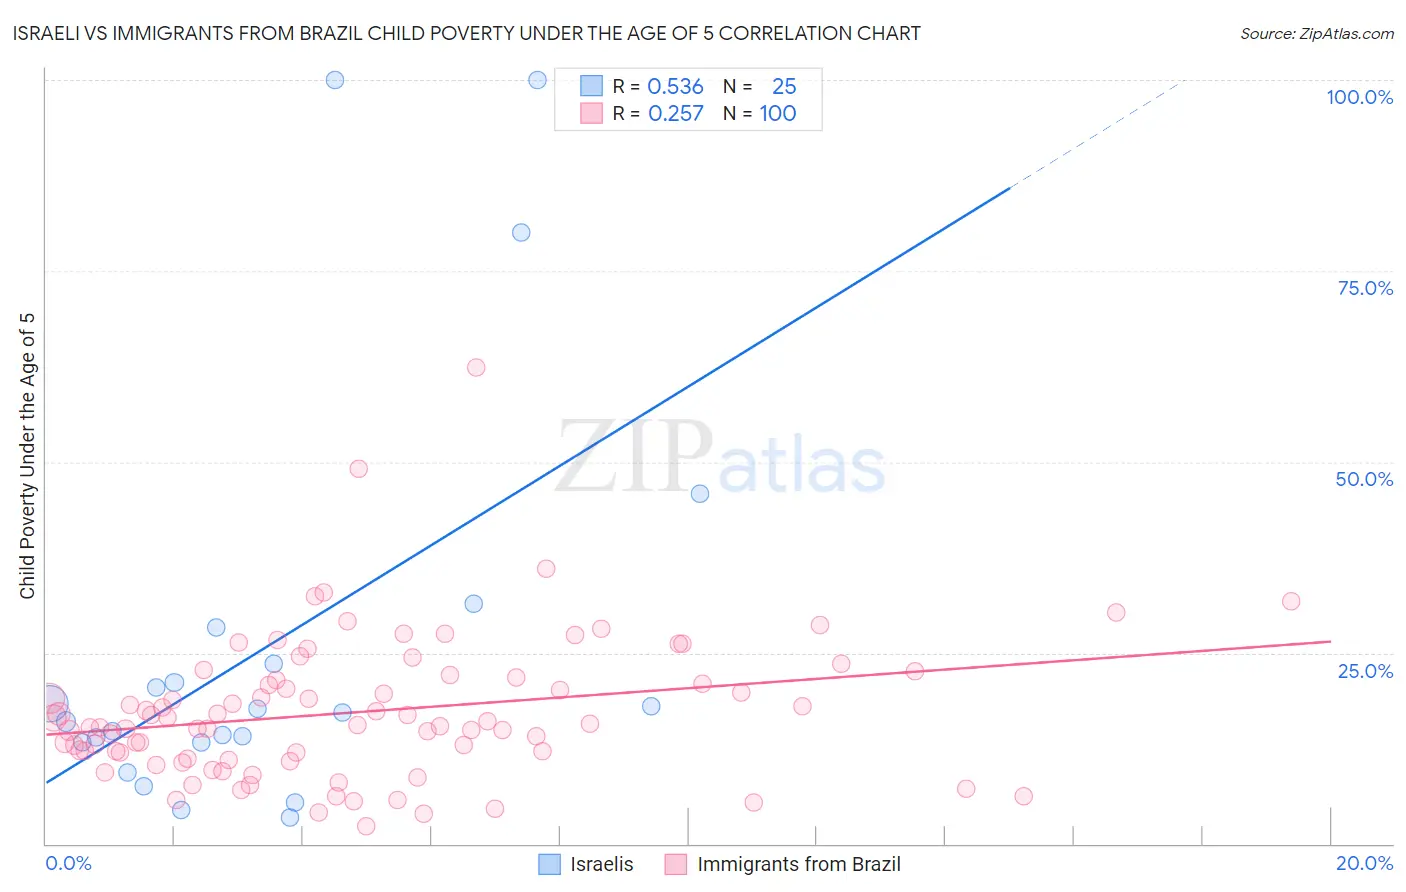 Israeli vs Immigrants from Brazil Child Poverty Under the Age of 5